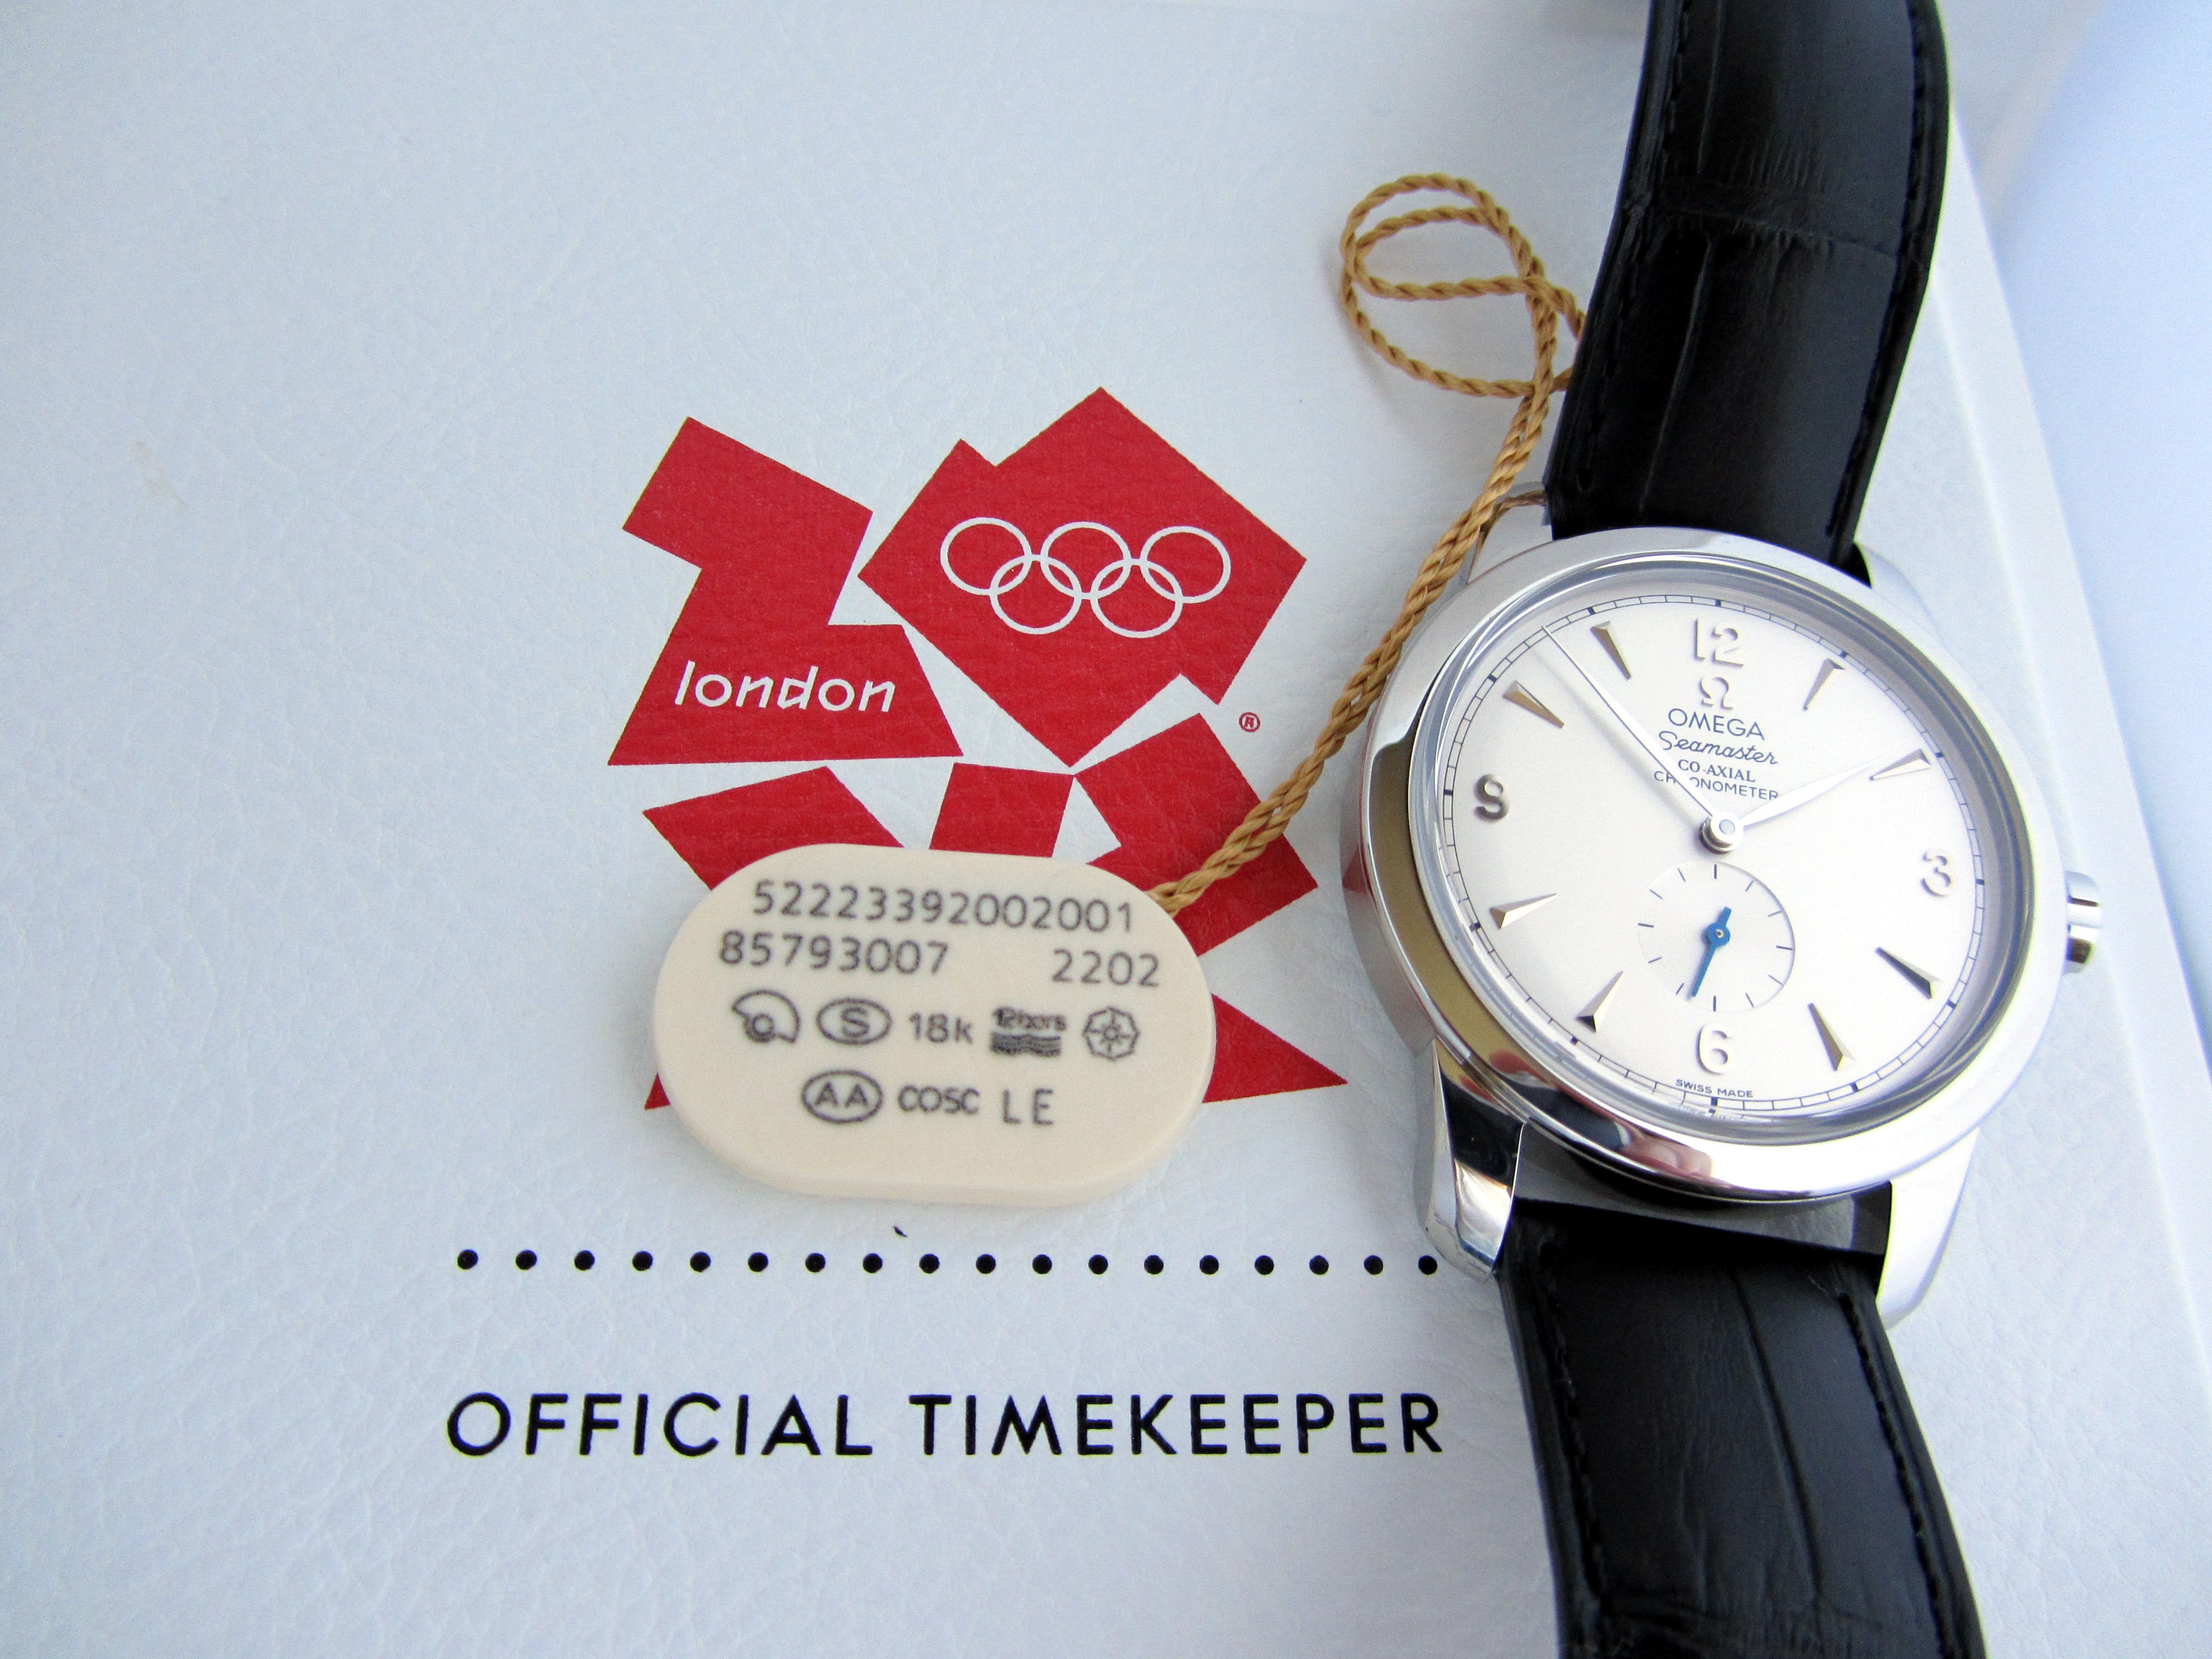 omega 2012 olympic watch for sale